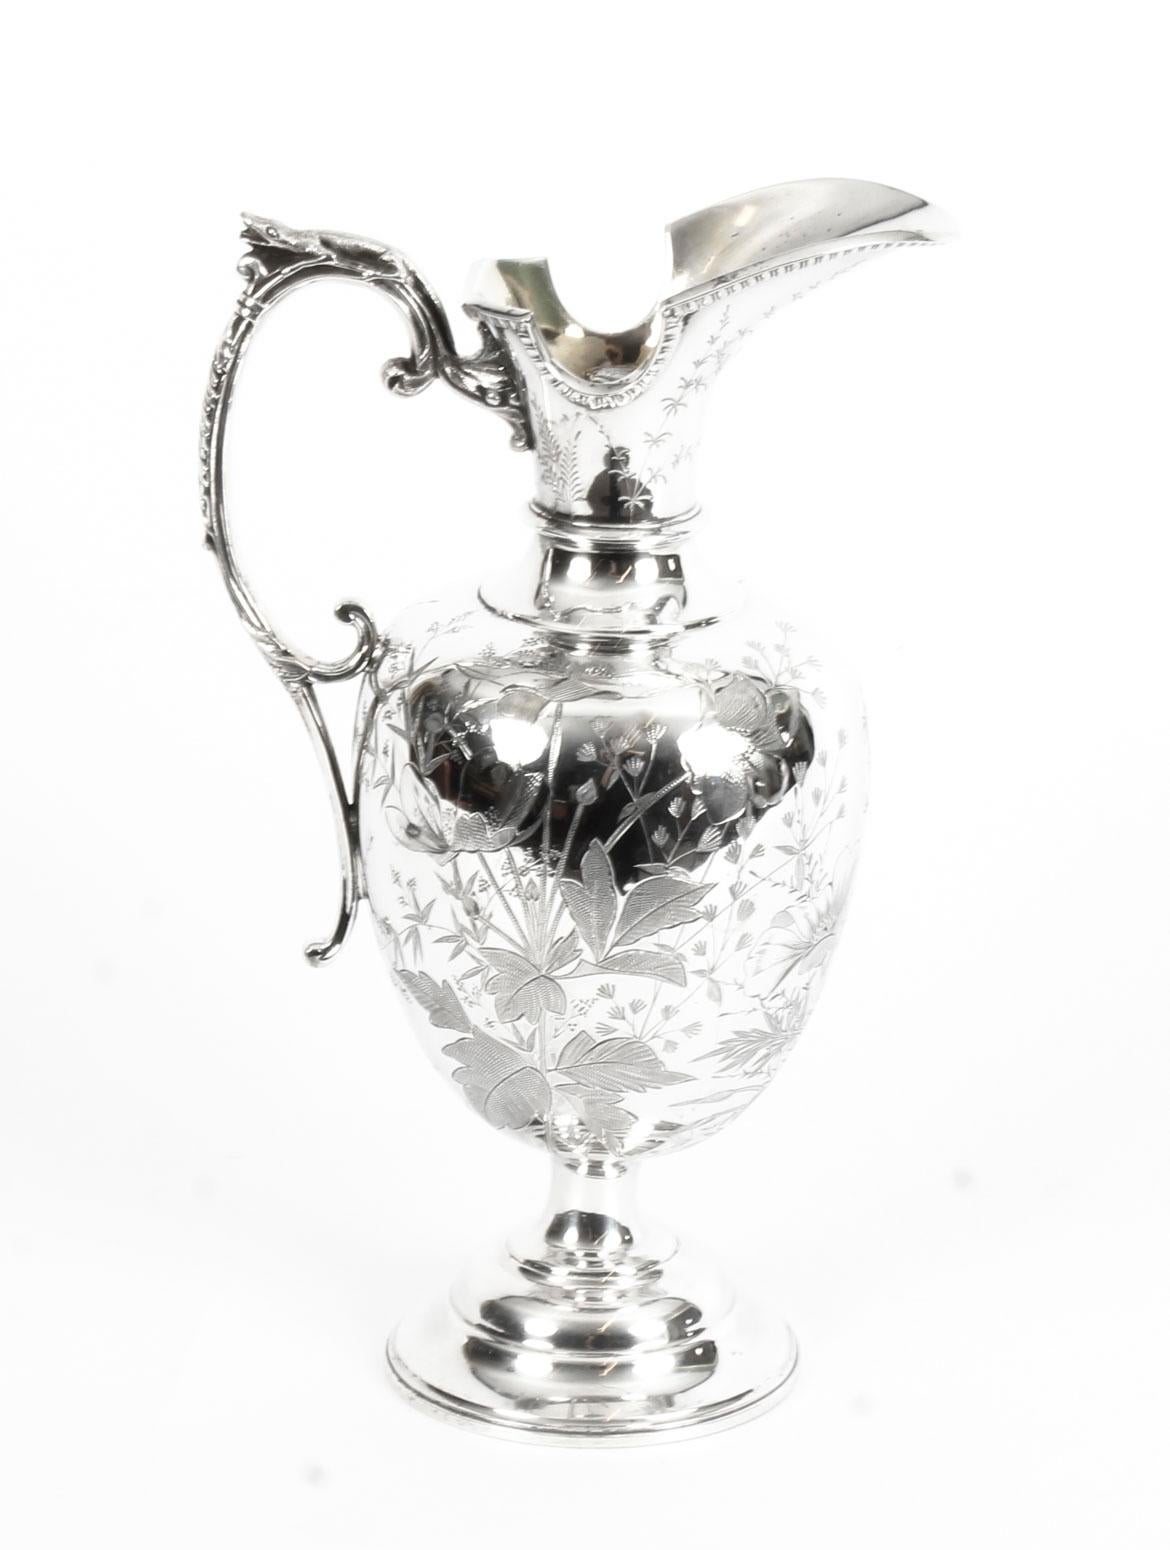 This is a truly stunning English Victorian silver-plated claret jug, bearing the makers' mark of the renowned silversmiths Atkin Brothers, Sheffield, circa 1880 in date.
 
This magnificent claret jug has a charming rounded shape, stands on an